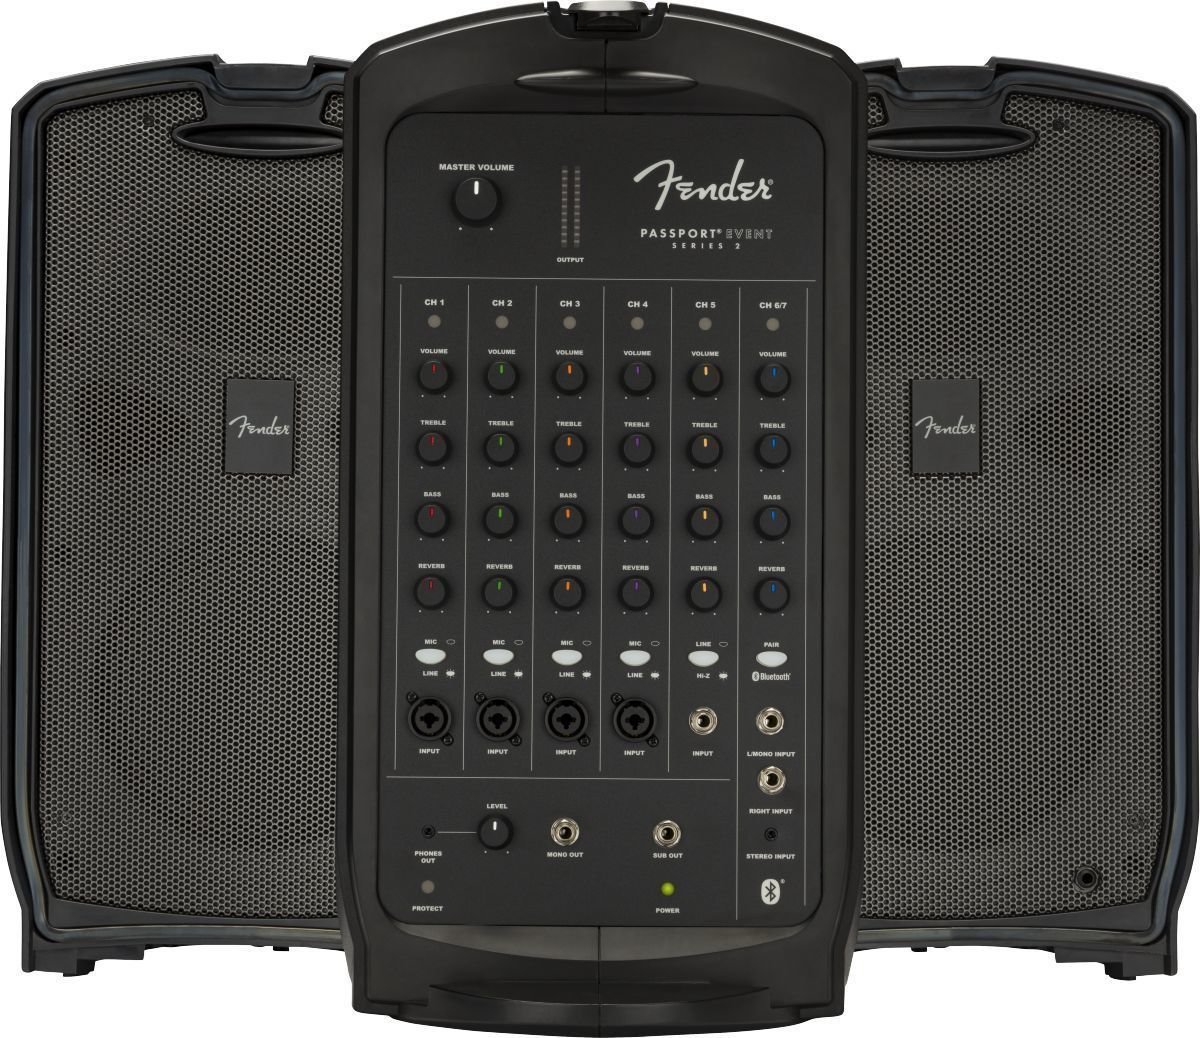 Portable PA System Fender Passport Event Series 2 Portable PA System